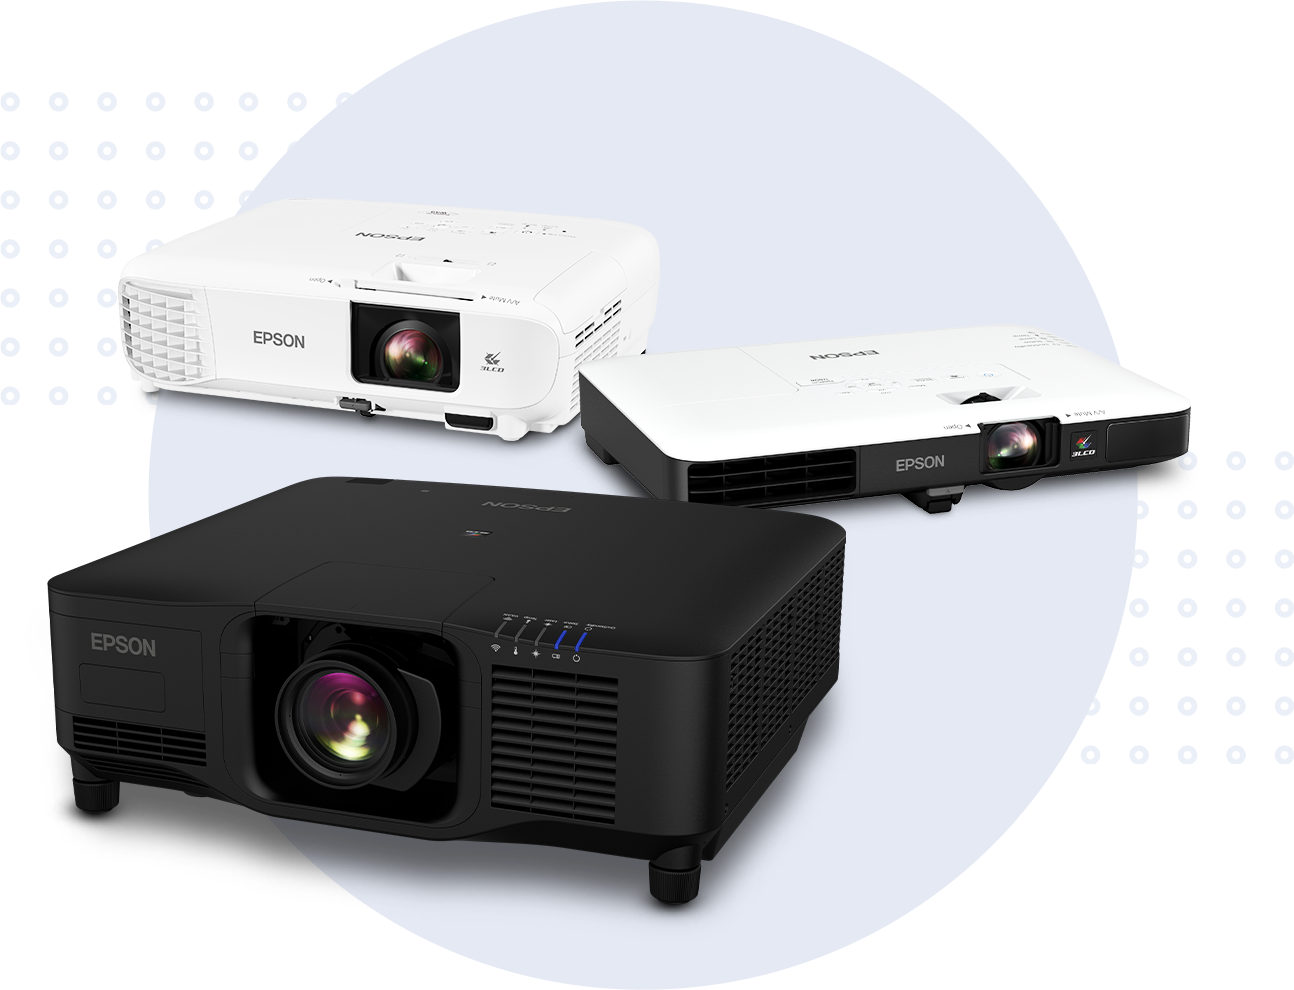 The Epson PL1780W, EB-PU2220B, and PowerLite W49 projectors